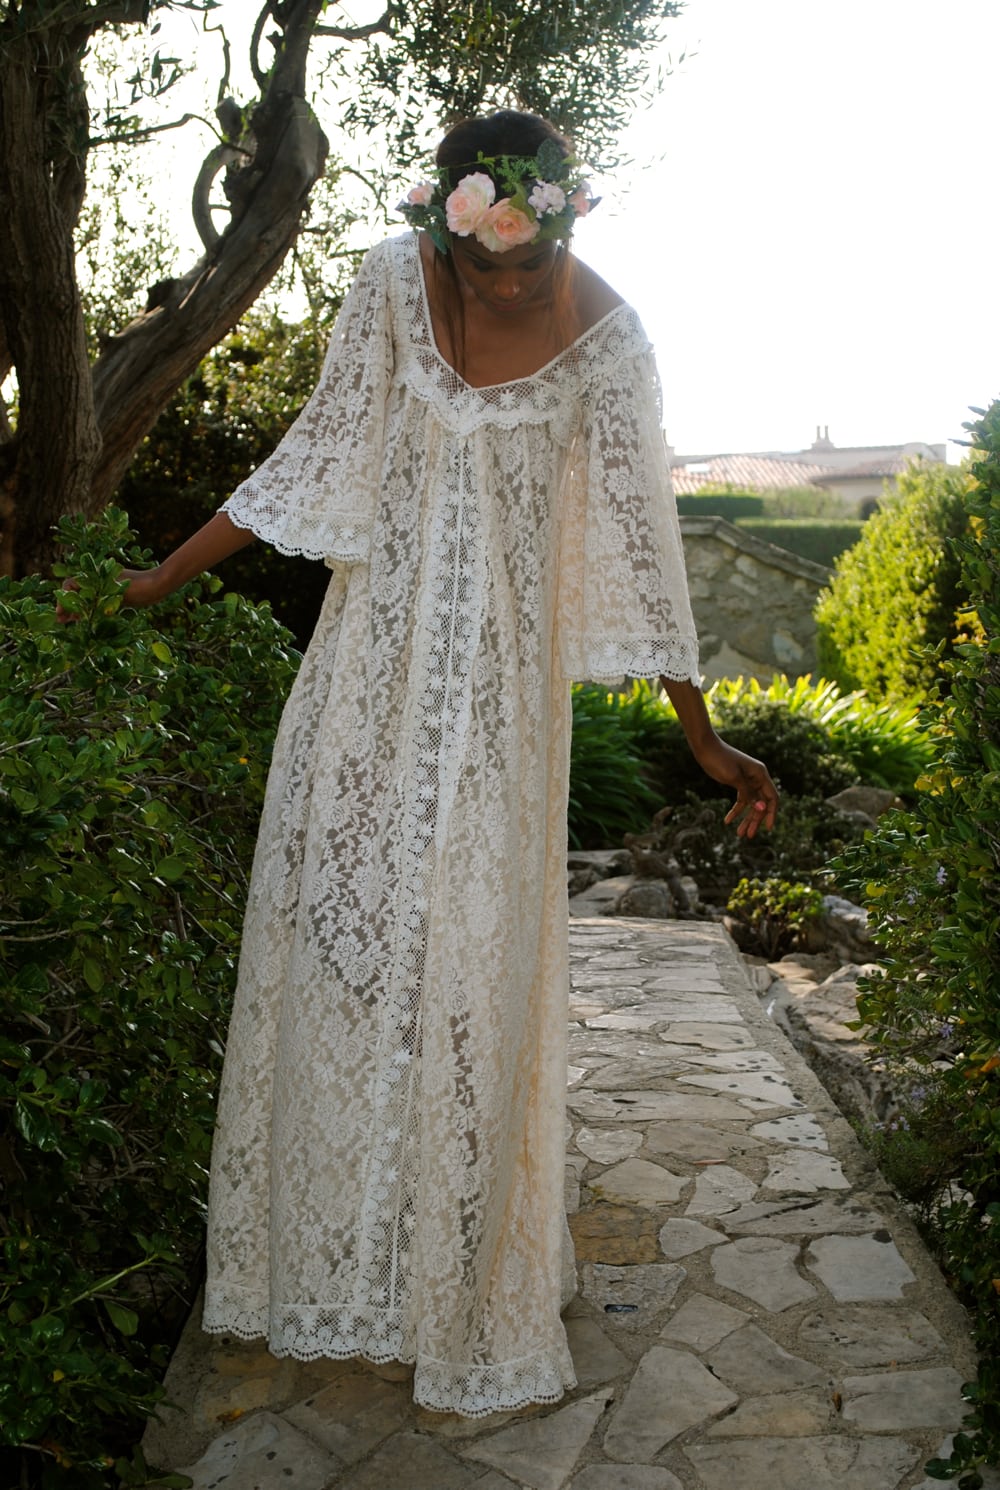 A woman wears a loose-fitting white lace dress with large bell sleeves